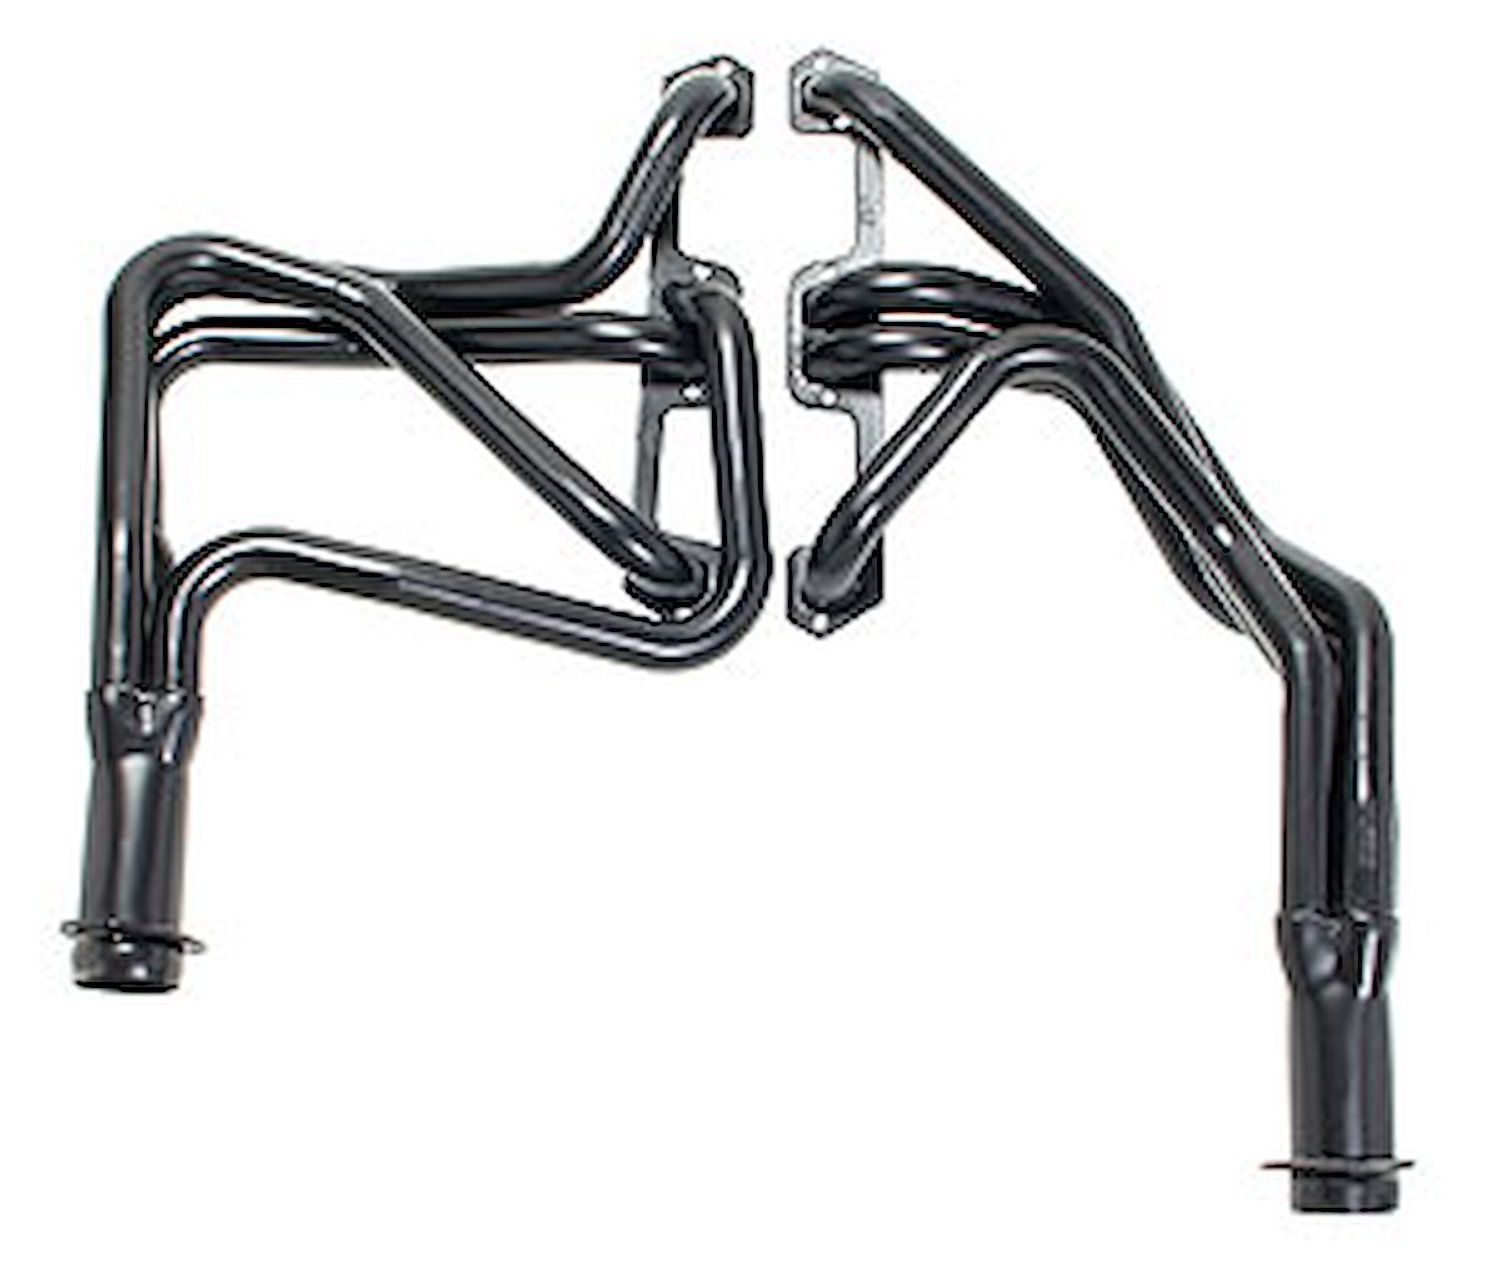 Standard Duty Full Length Uncoated Headers for 1967-1980 Barracuda, Dart, Duster, Belvedere, Road Runner, Charger, Super Bee